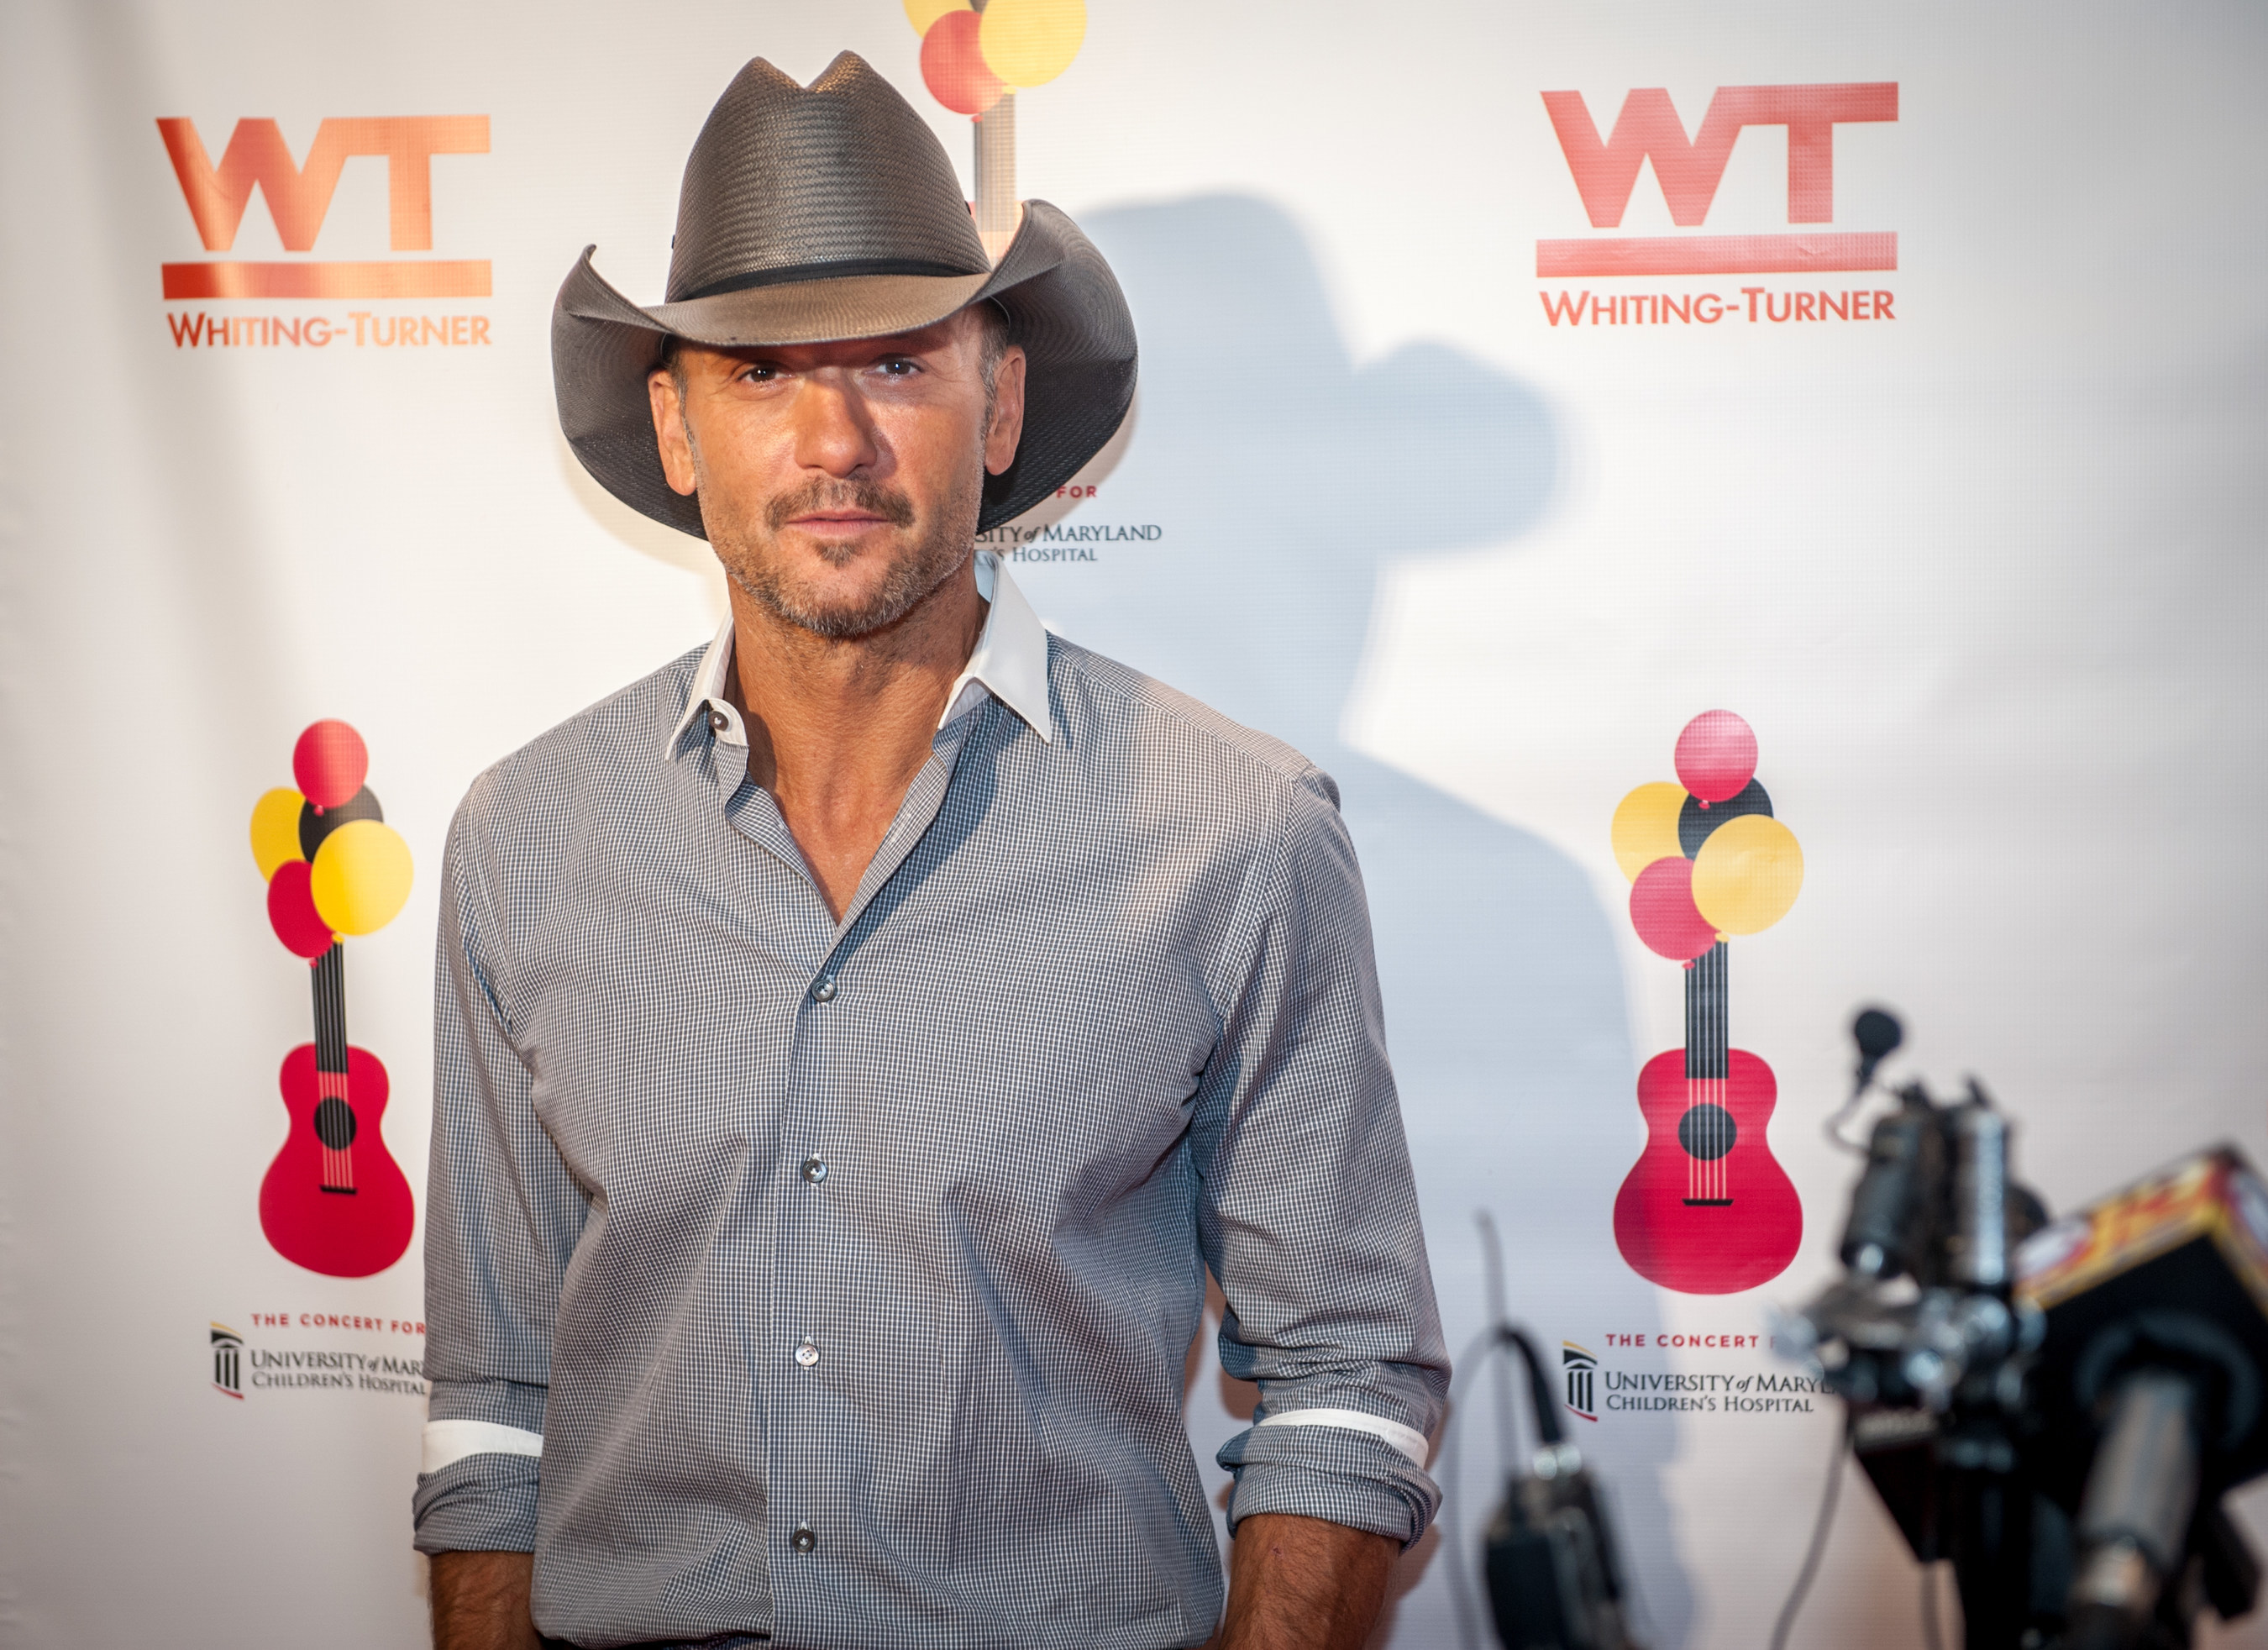 Tim McGraw is seen at the Concert For University of Maryland Children's Hospital, on Saturday October 24th 2015 in Baltimore Maryland. McGraw headlined the concert to benefit the patients and programs of the Hospital.  Edwin Remsberg AP Images for University of Maryland Medical System Foundation